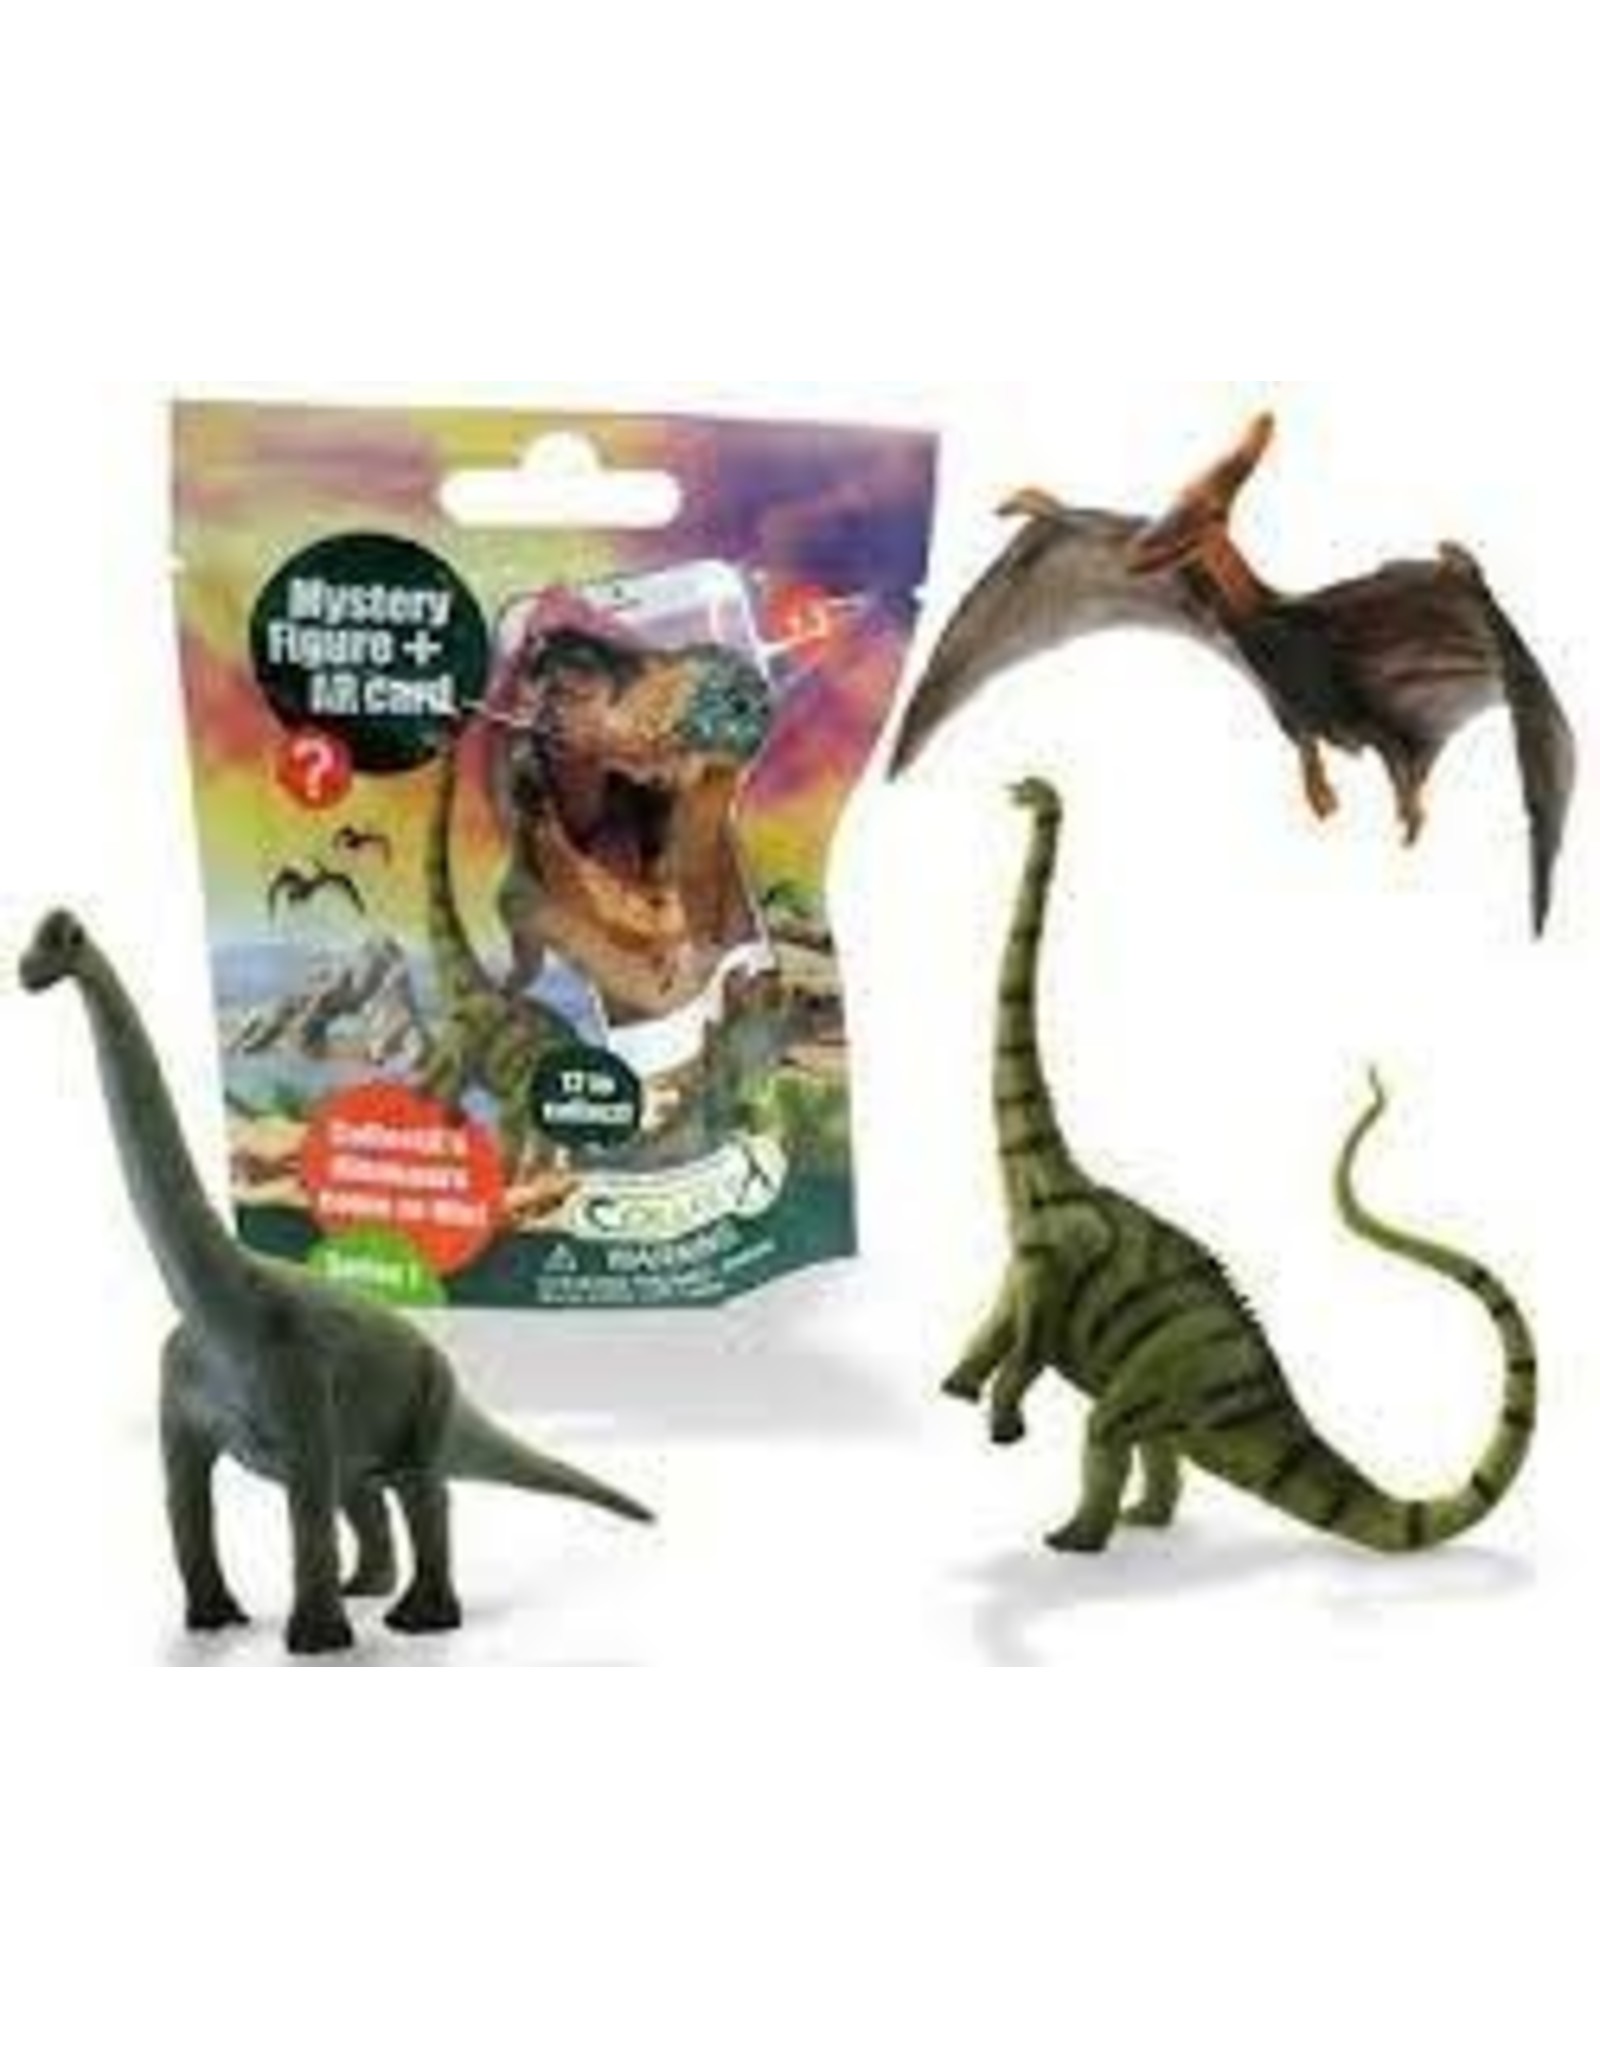 Collecta Dino Blind Bags